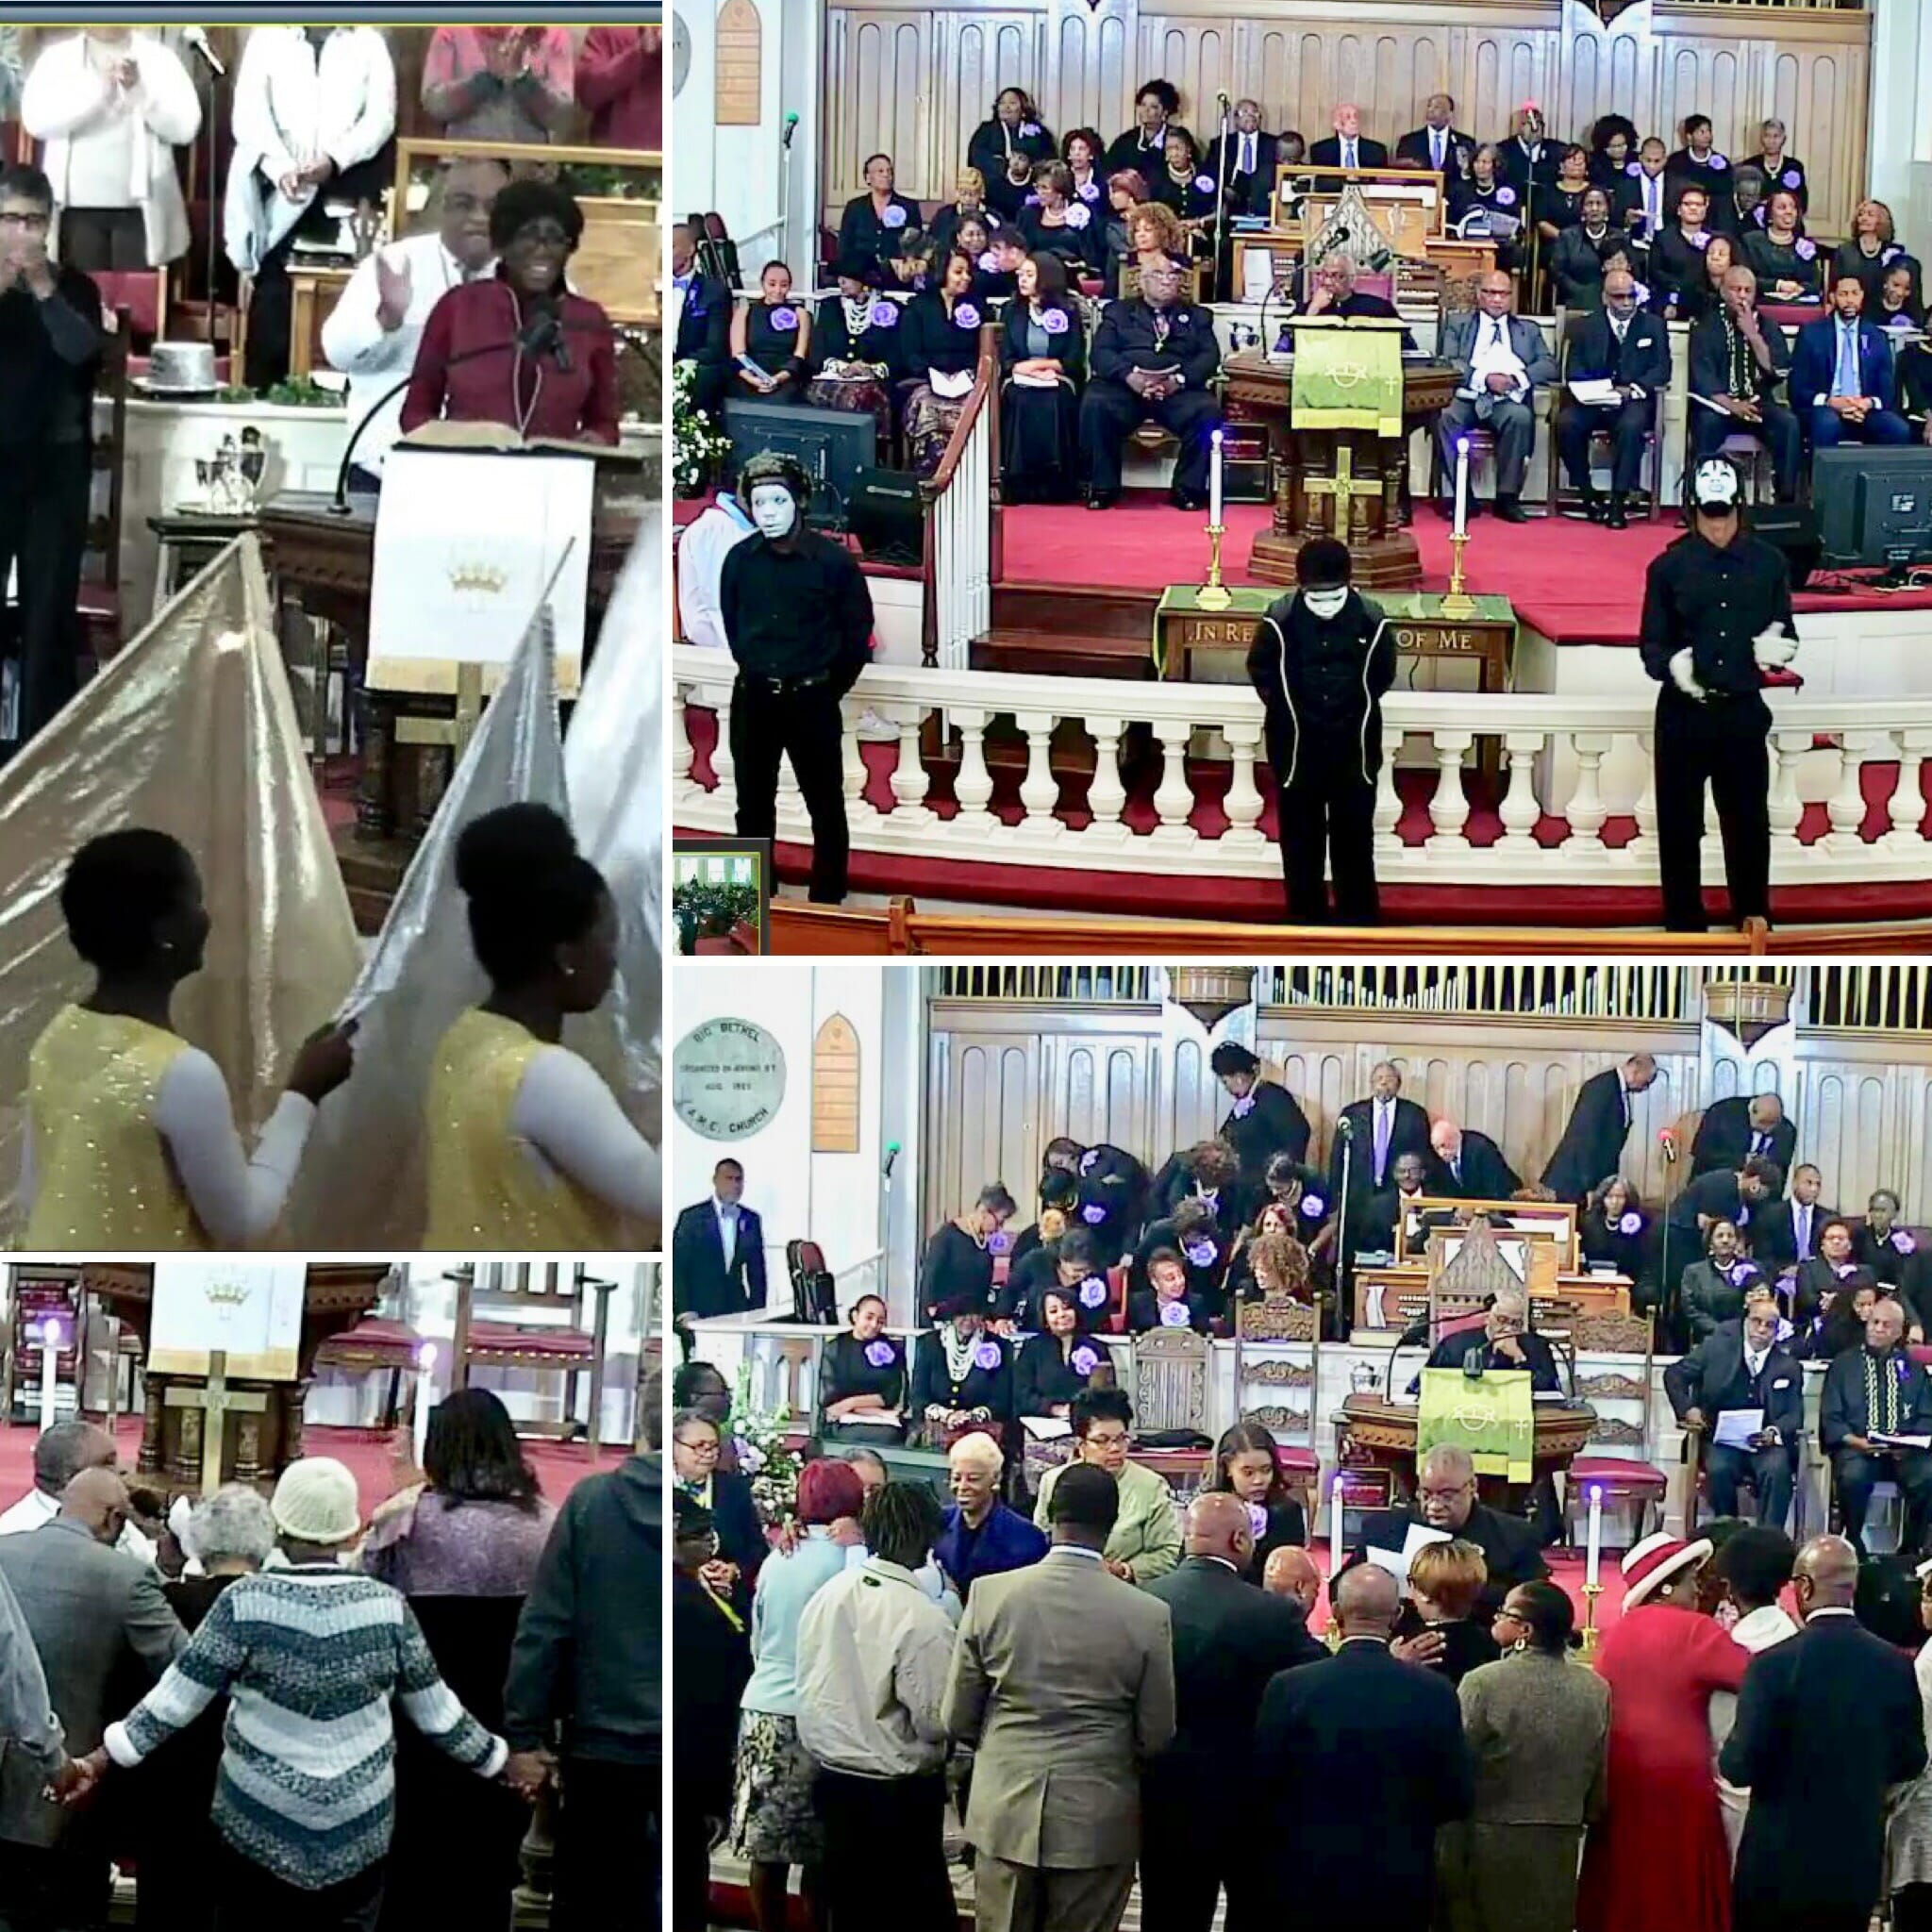 African-Americans at different events held at church.